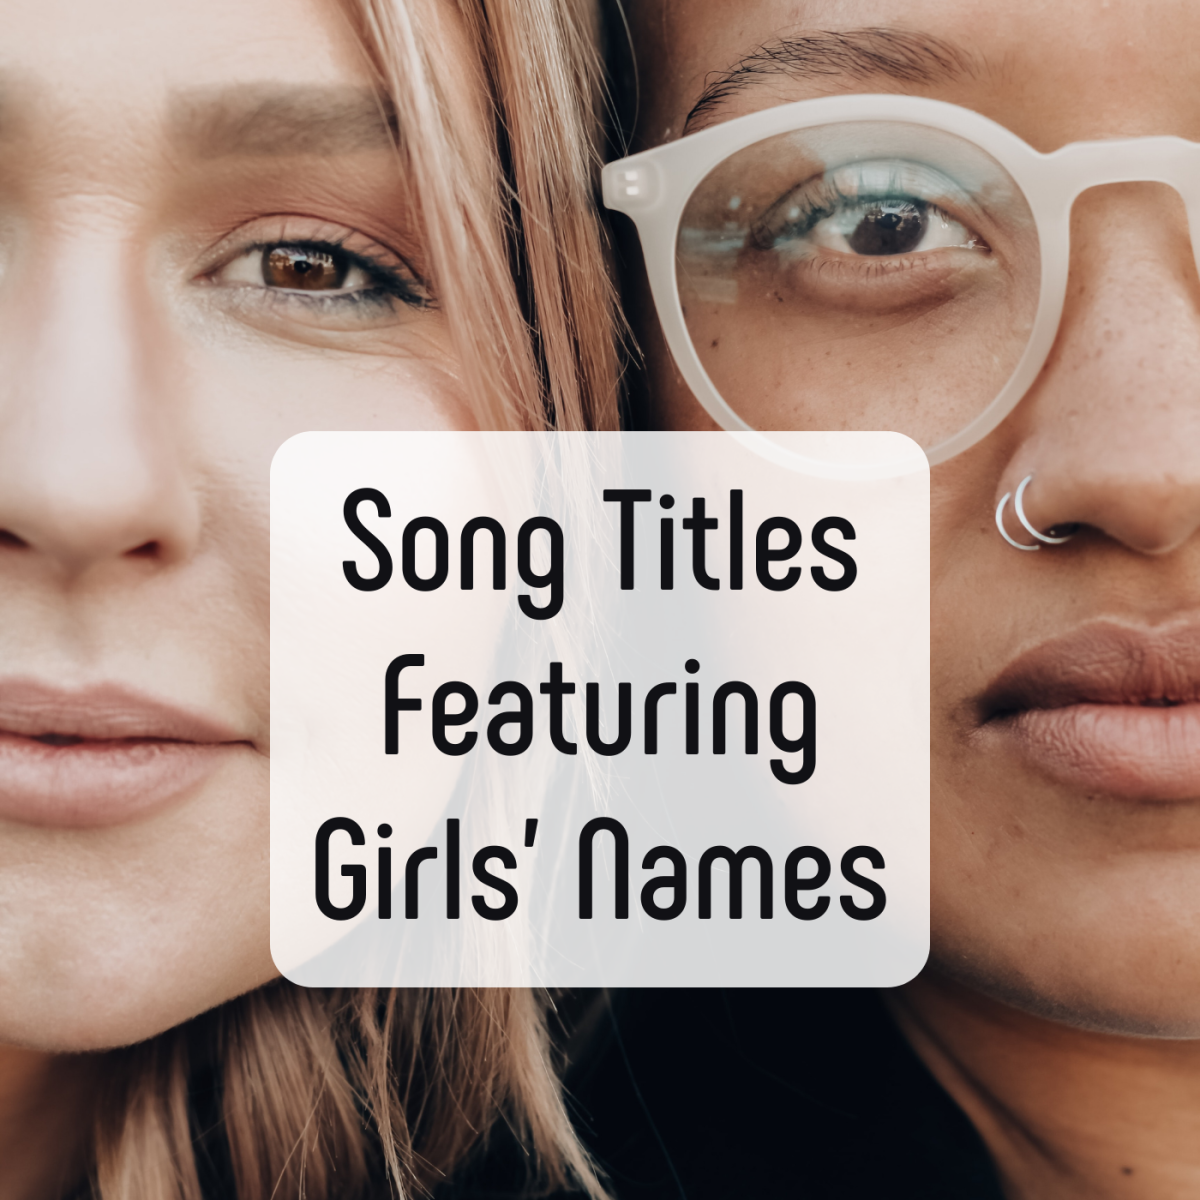 Top 10 Best Songs With Girls' Names in the Title